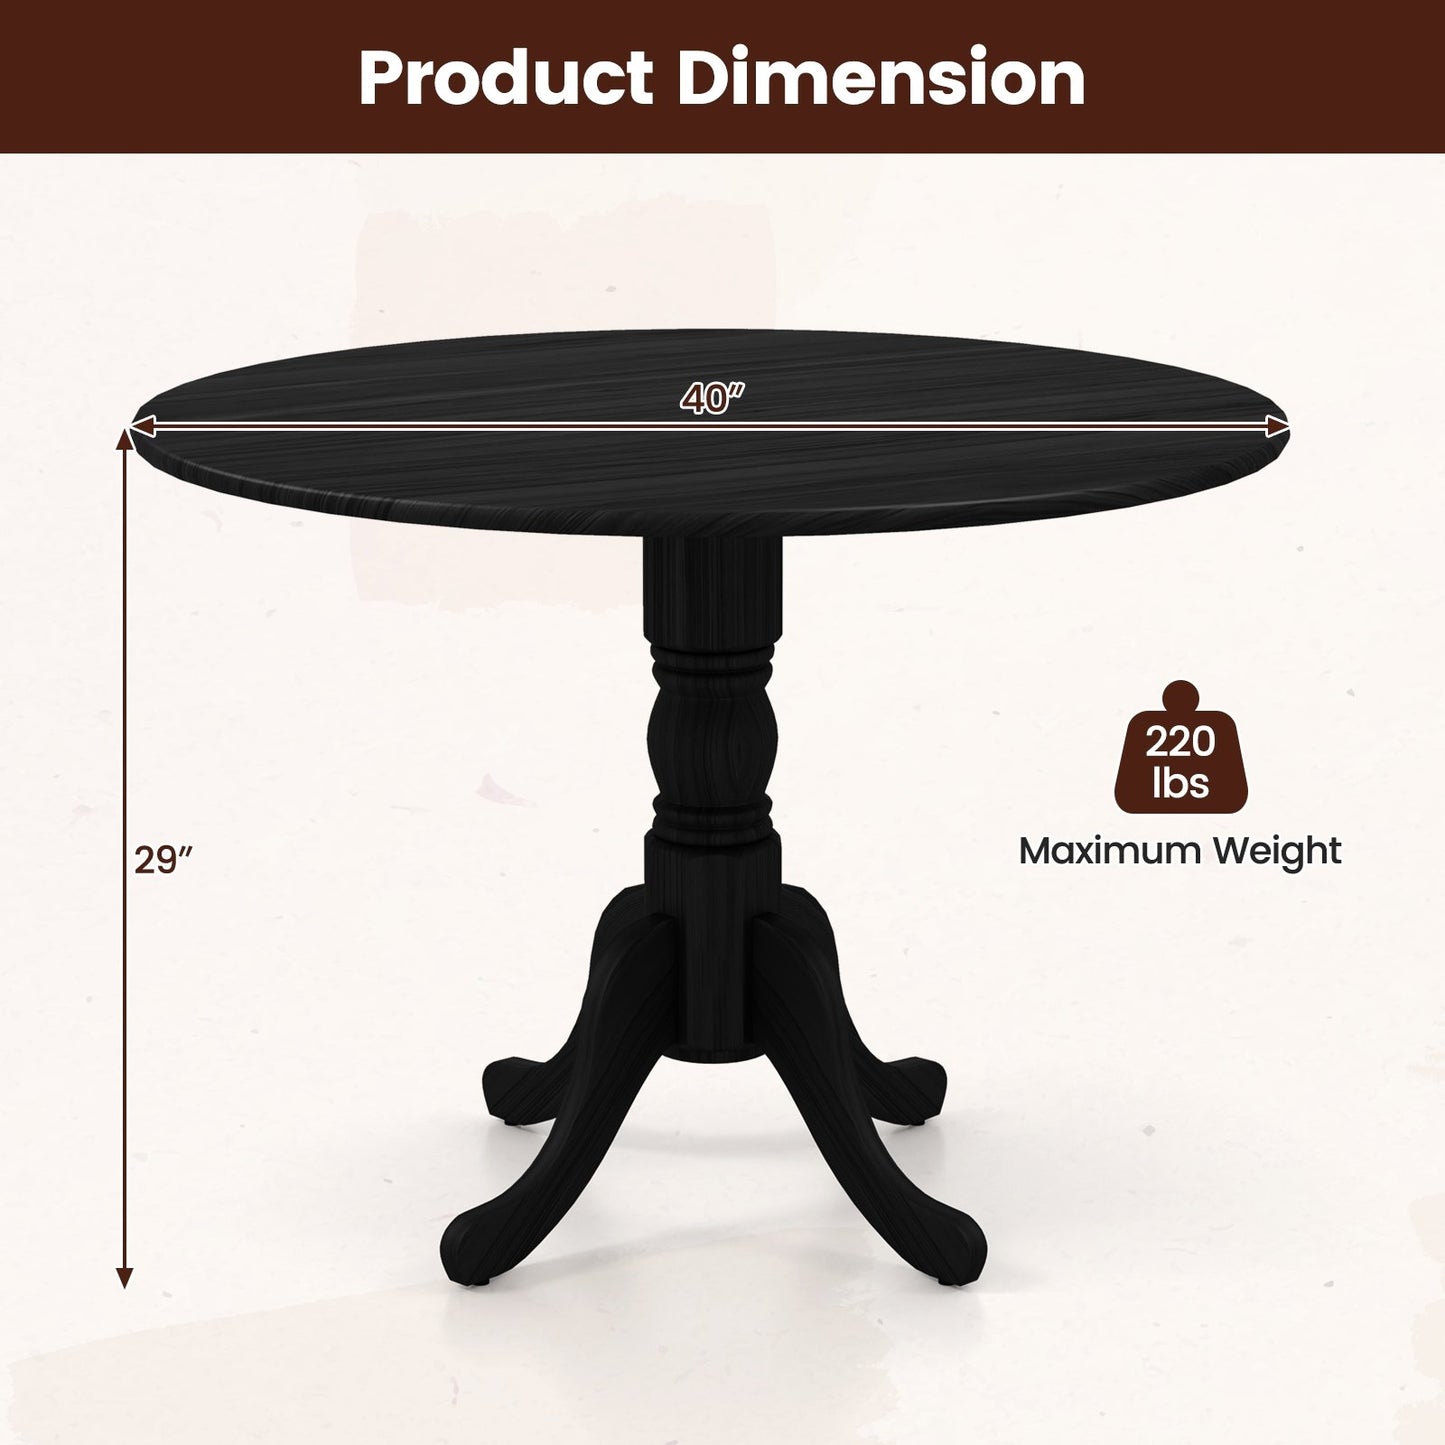 Wooden Dining Table with Round Tabletop and Curved Trestle Legs, Black